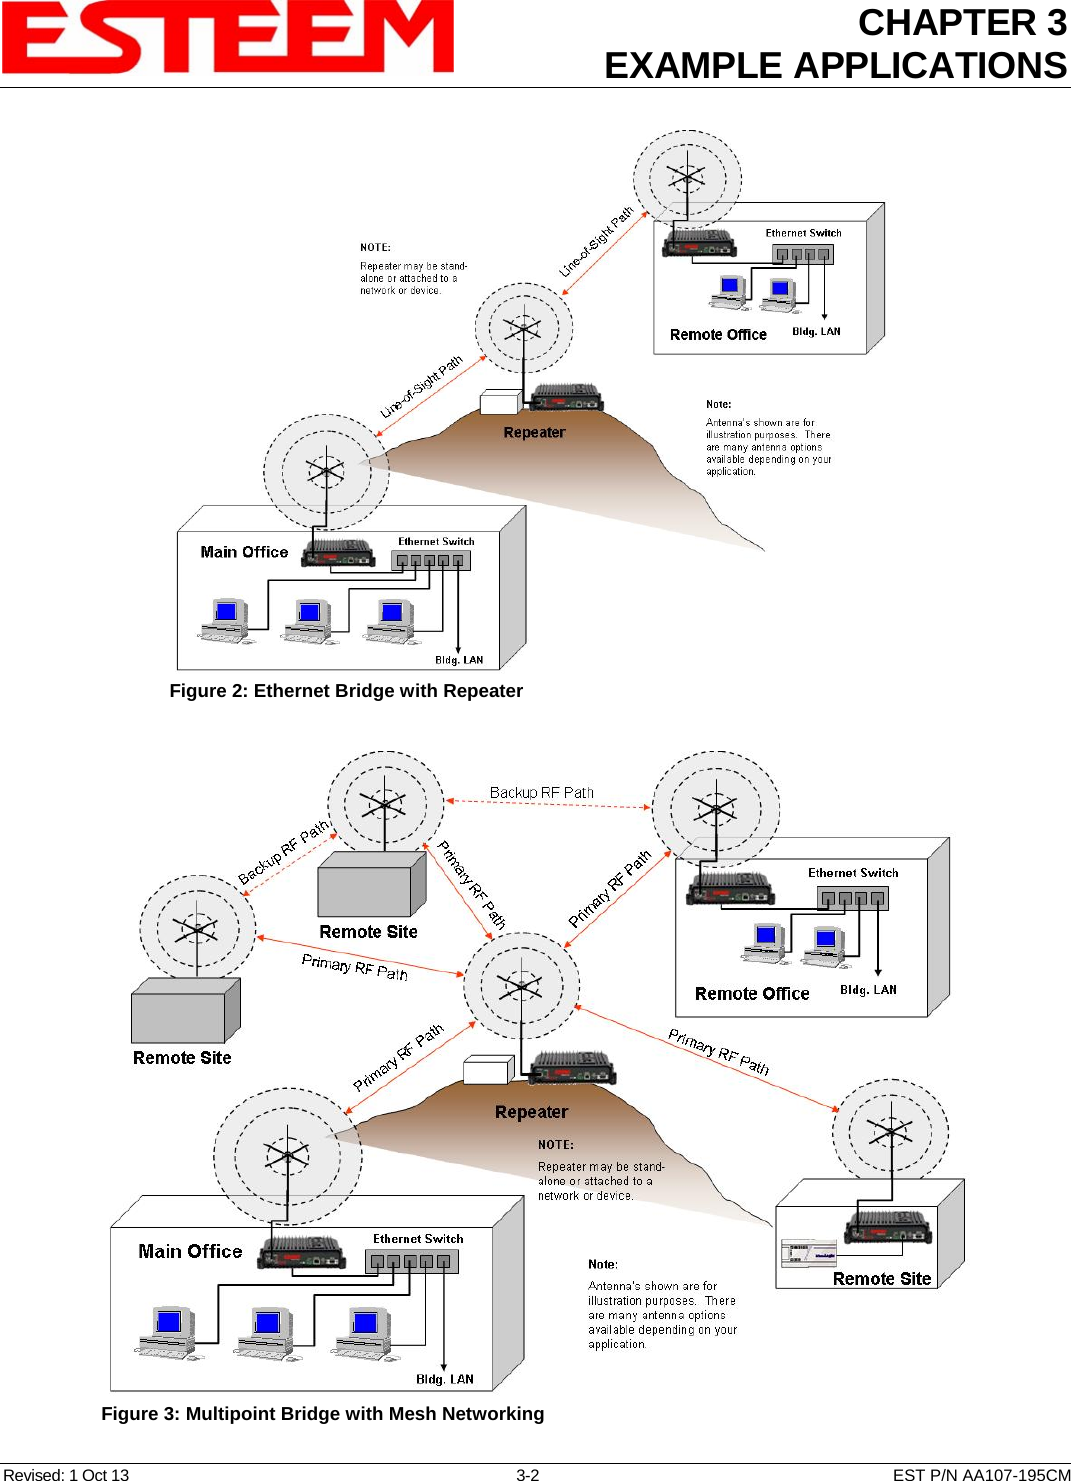 CHAPTER 3 EXAMPLE APPLICATIONS   Figure 2: Ethernet Bridge with Repeater   Figure 3: Multipoint Bridge with Mesh Networking  Revised: 1 Oct 13  3-2  EST P/N AA107-195CM 